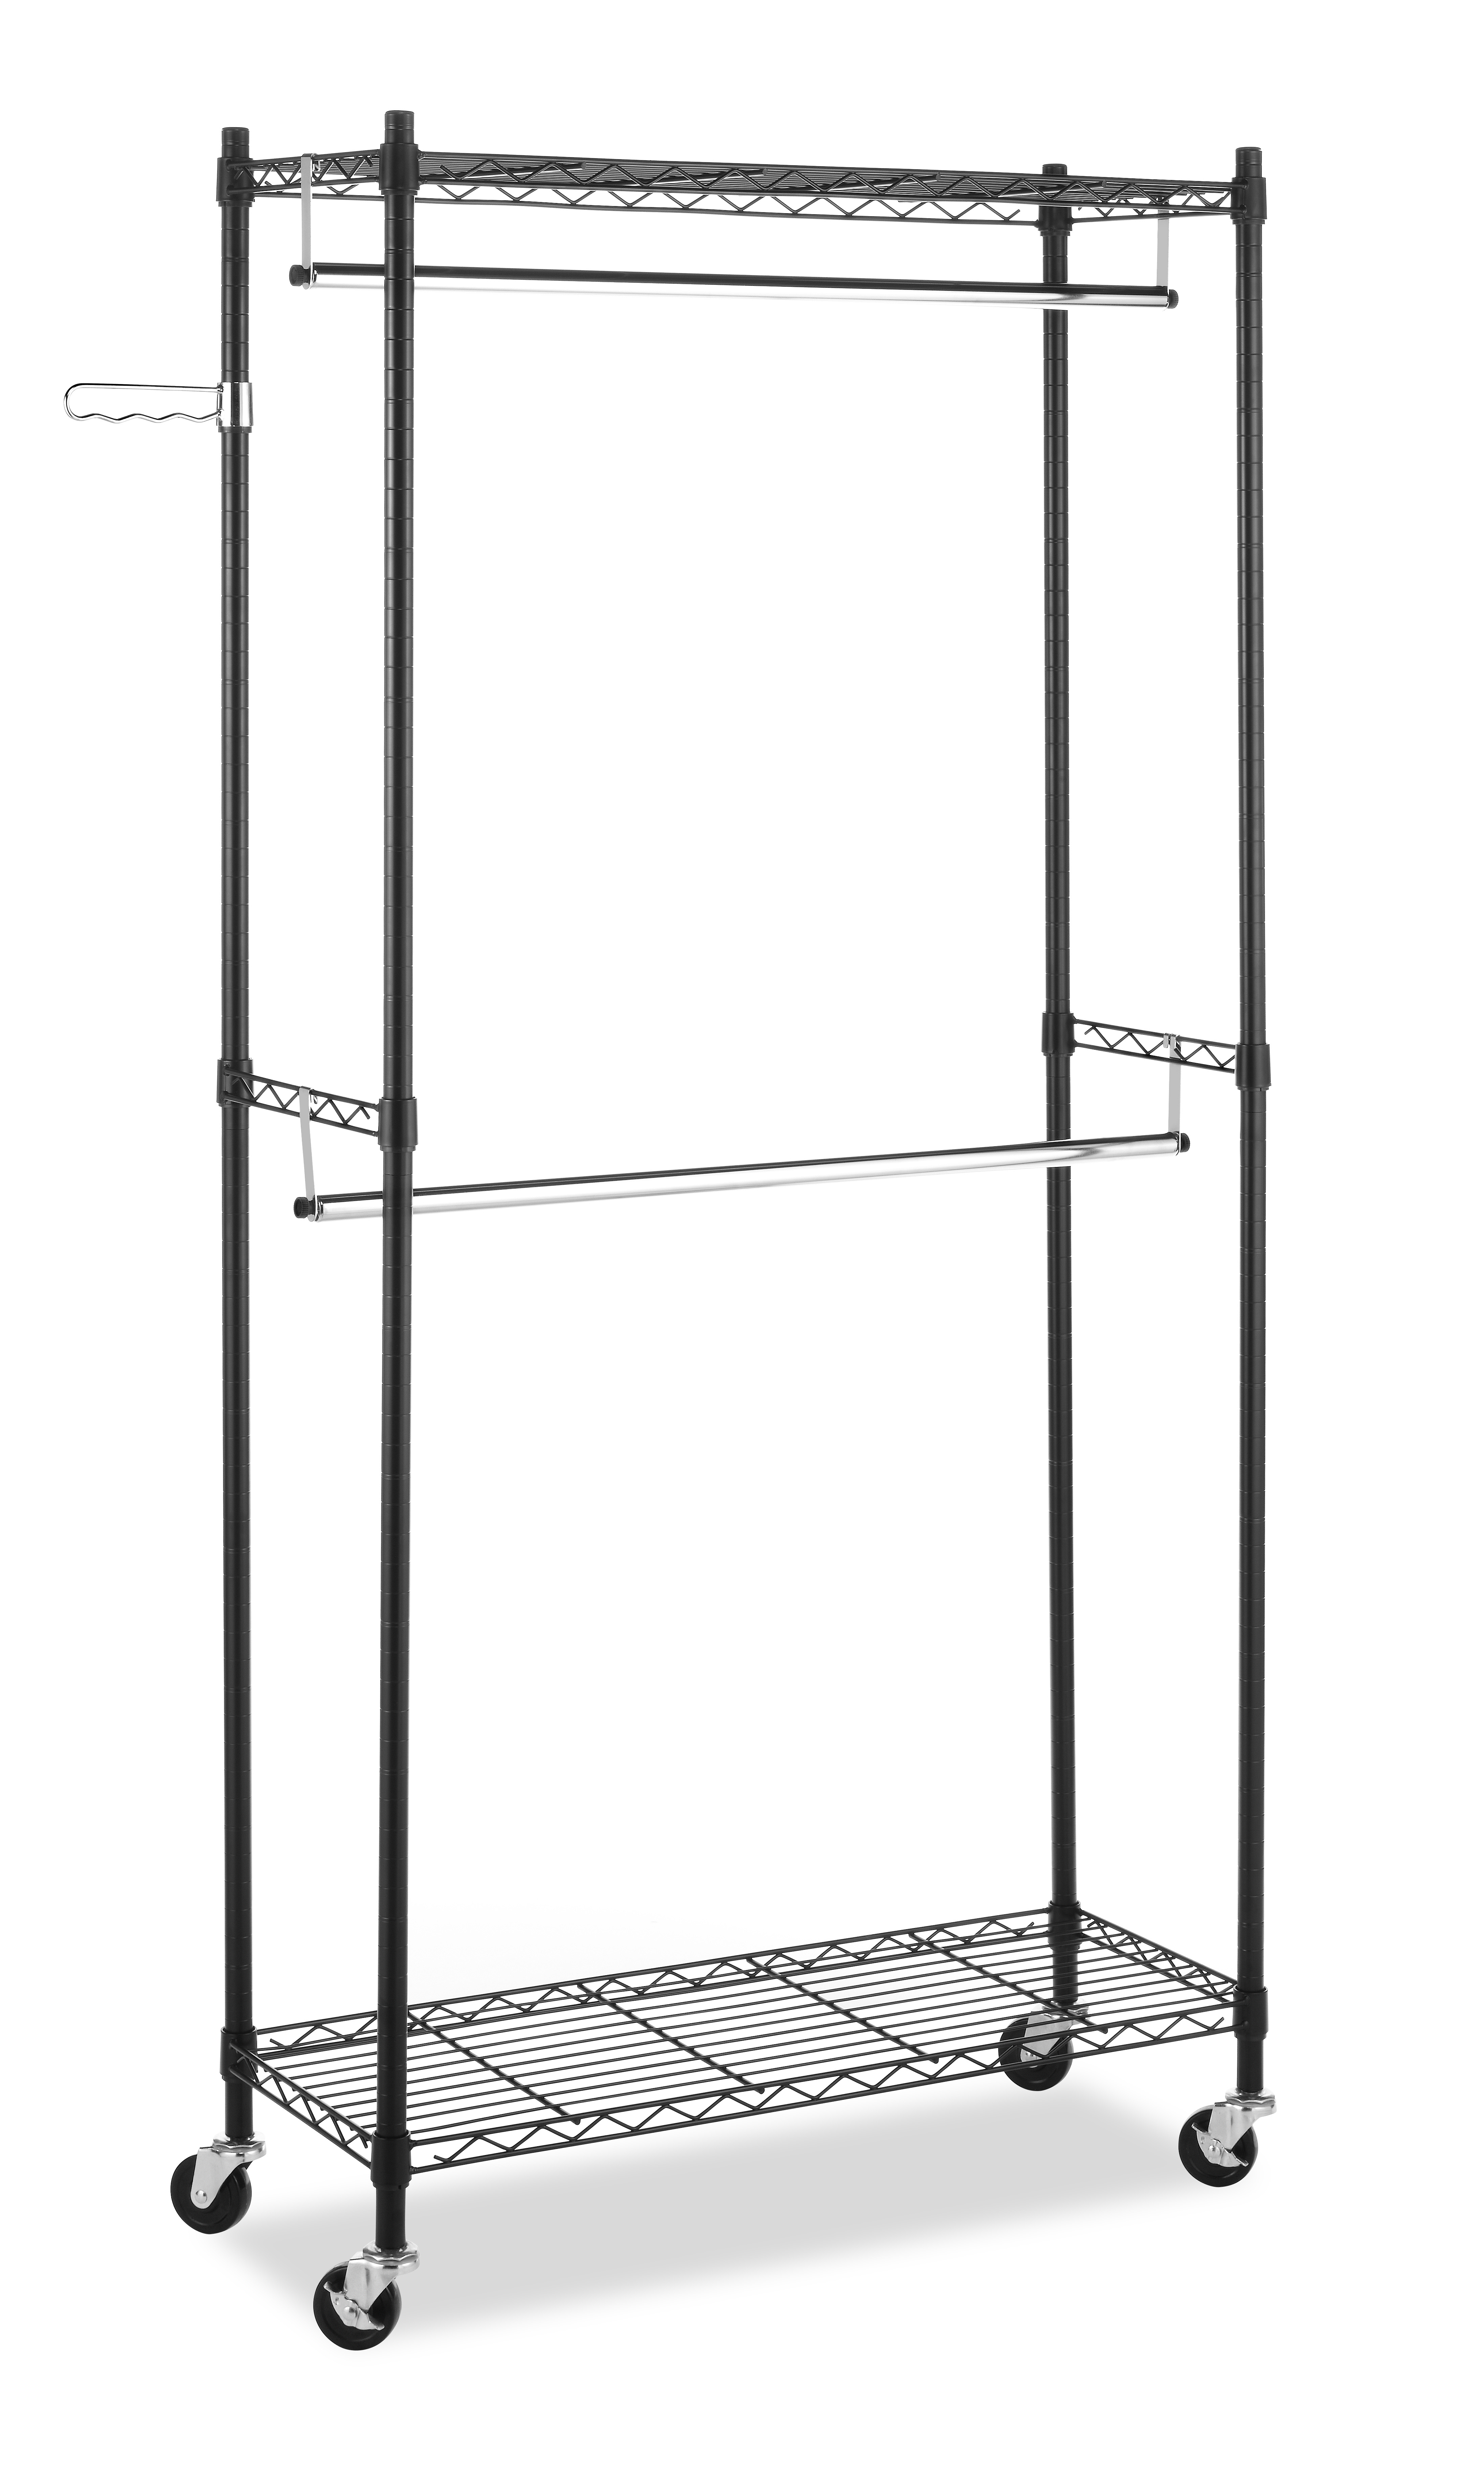 Whitmor Double Rod Rolling Garment Rack, Metal, Black and Chrome - image 1 of 8